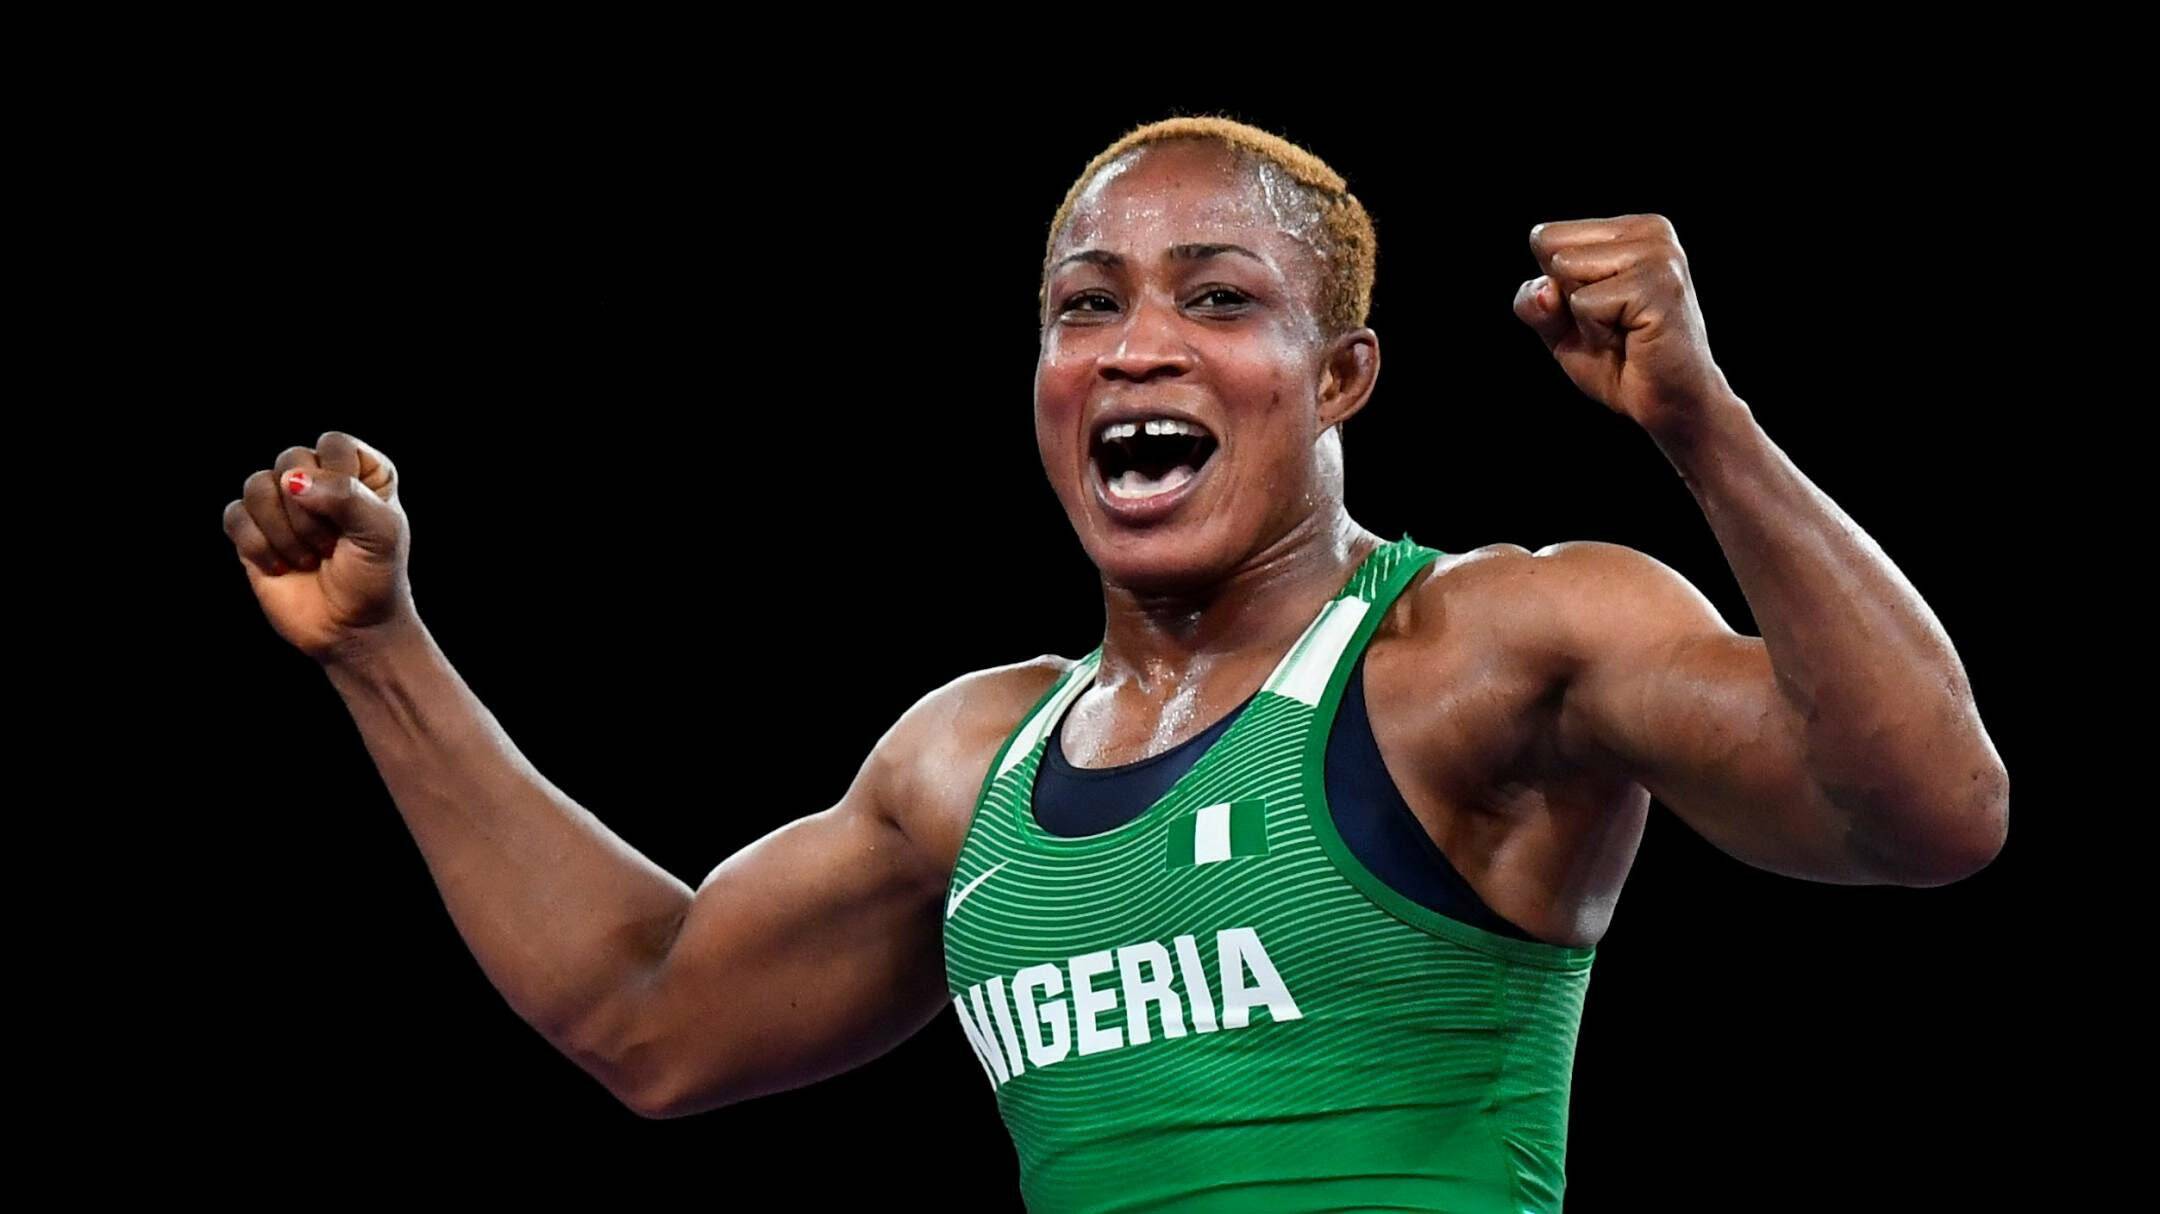 Wrestling: Nigeria’s Blessing Oborududu wins first silver at Tokyo Olympics